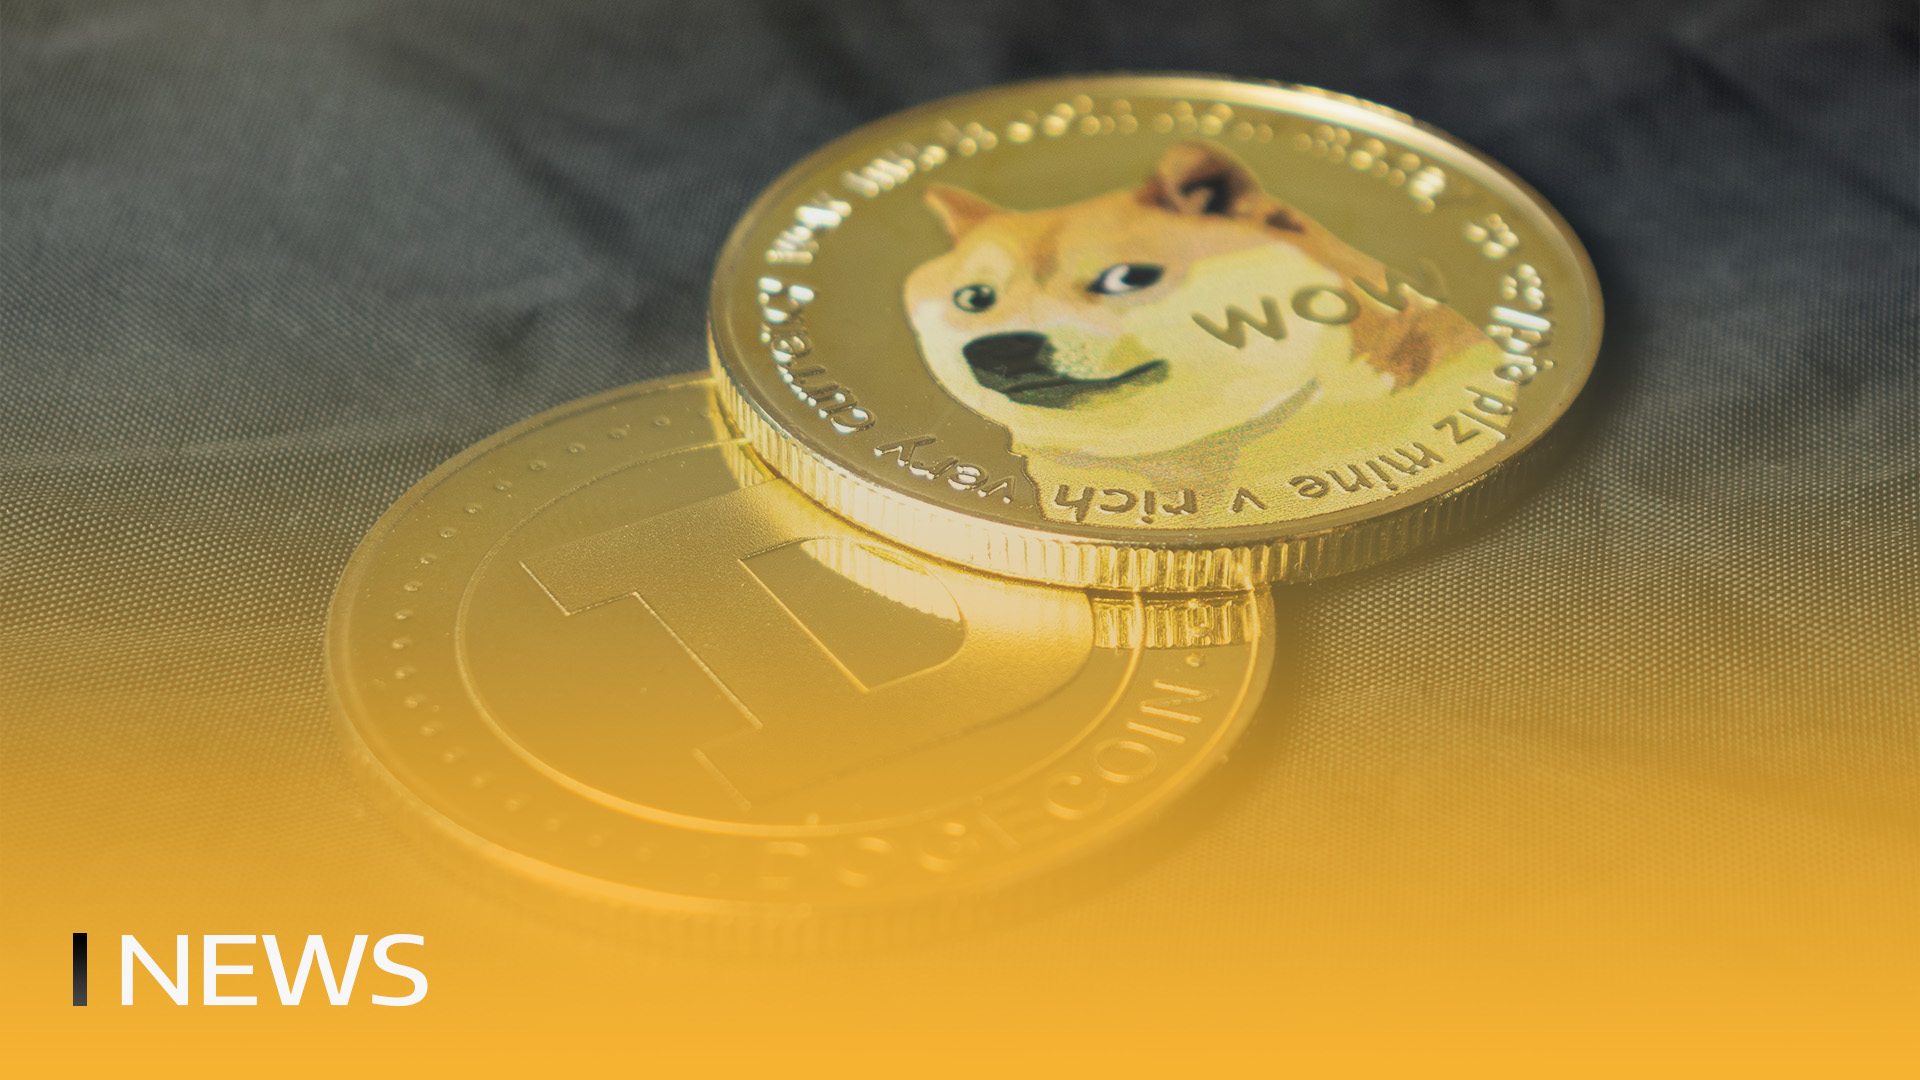 Dogecoin Will Be Used to Buy Tesla Cars